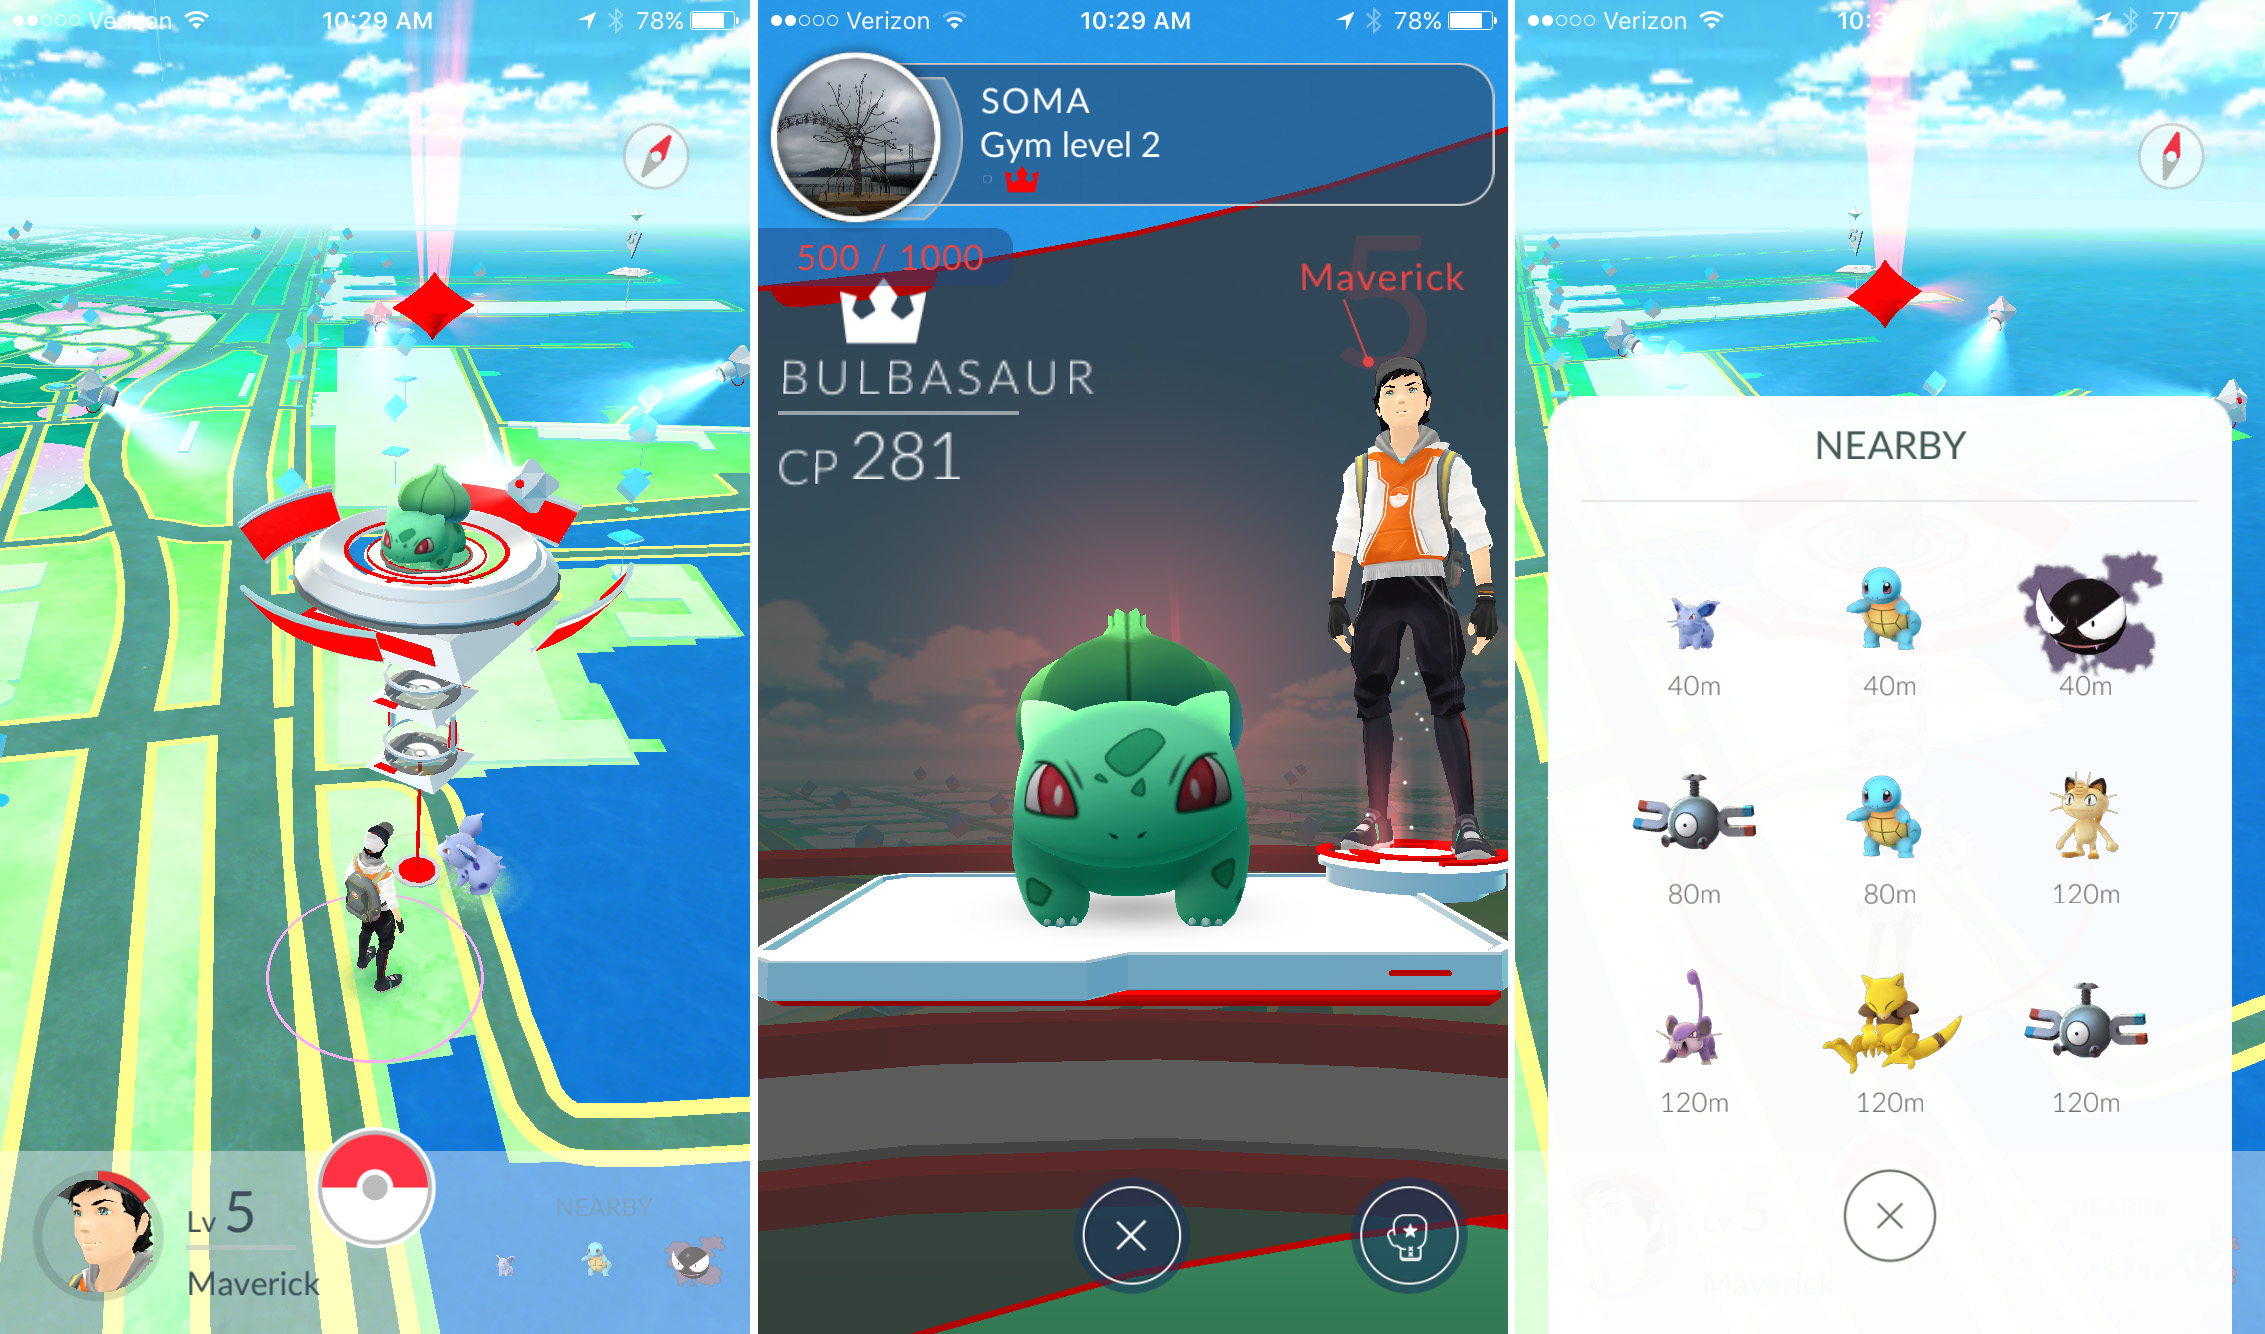 Screenshots from the Pokemon GO game to show your character and characters nearby.